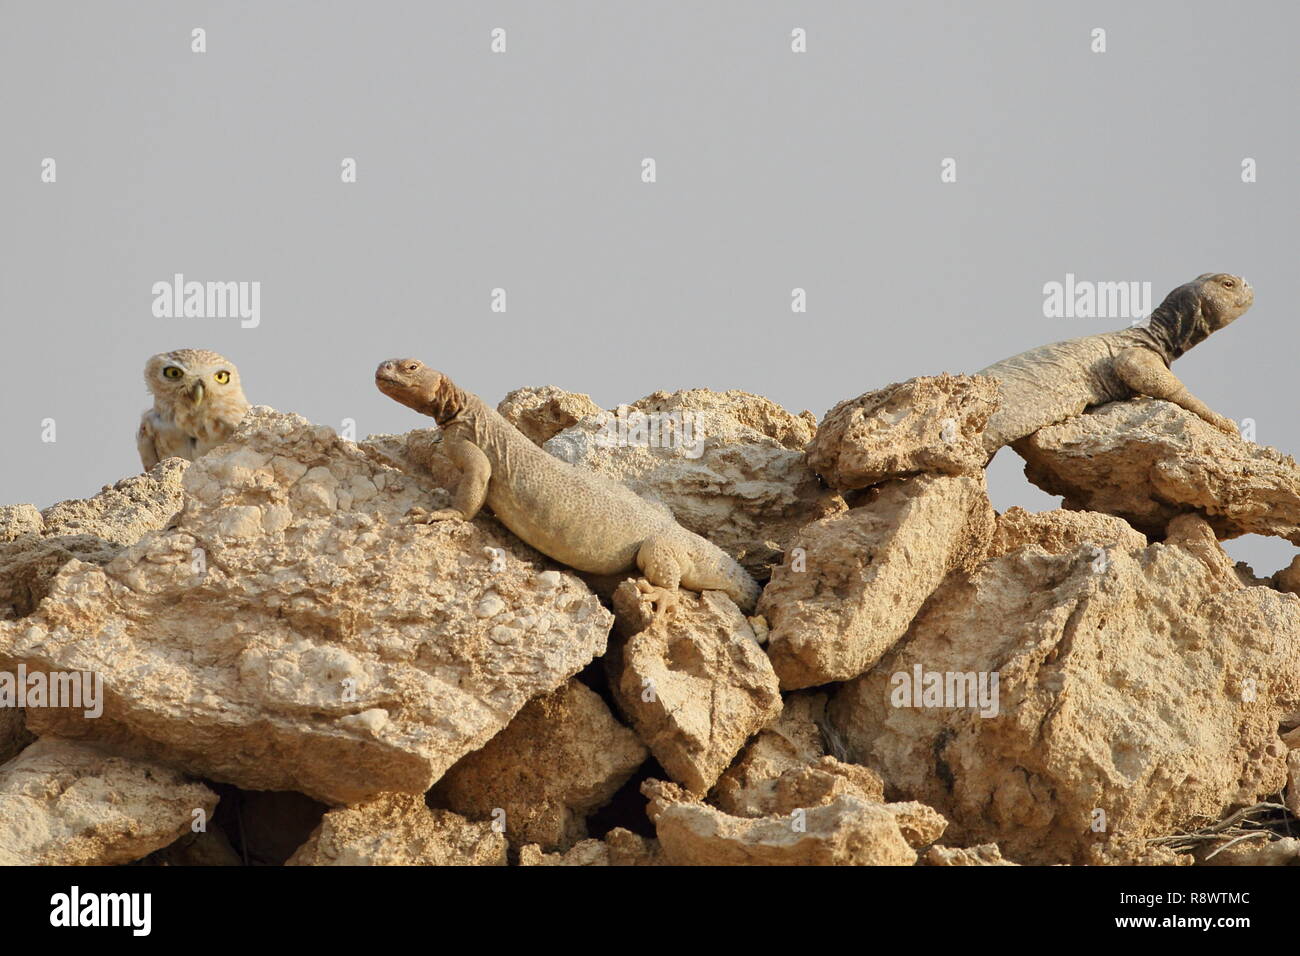 rare sight of a little Owl shared accommodation with spiny tailed Lizards on Rock Pile at the Arabian Desert. Stock Photo